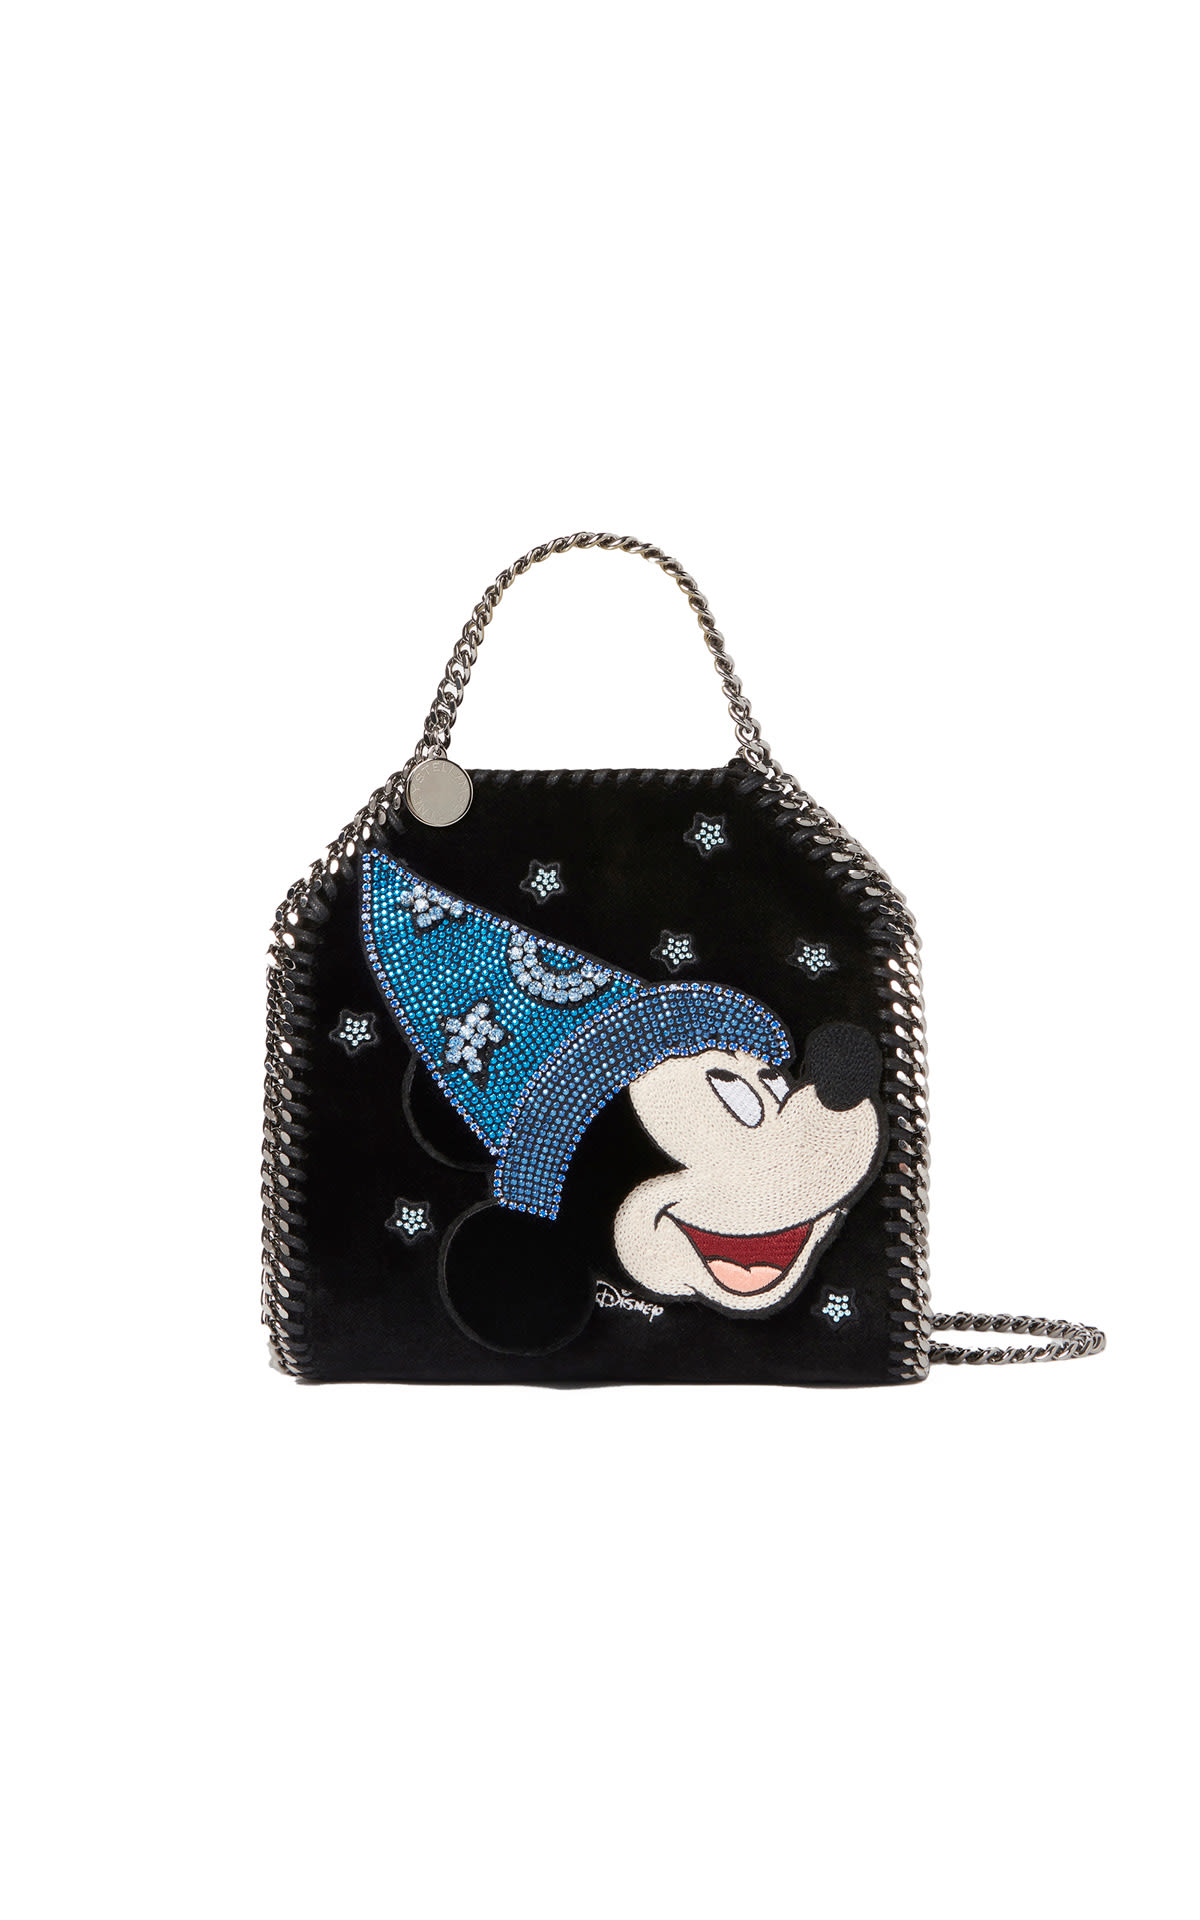 Tote bag with print for Disney Fantasia of Mickey Mouse Stella McCartney